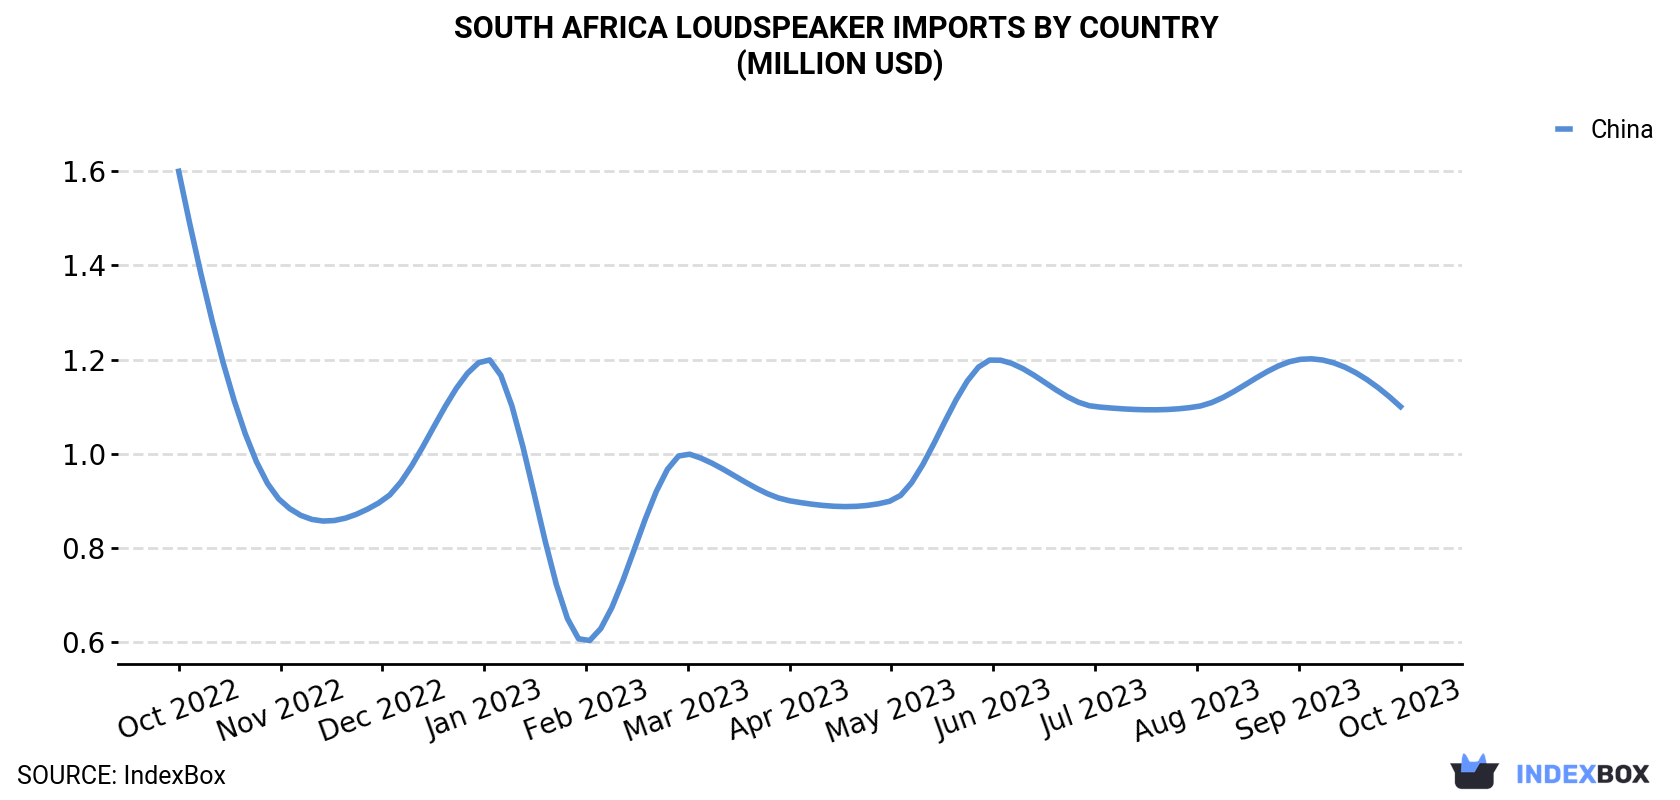 South Africa Loudspeaker Imports By Country (Million USD)